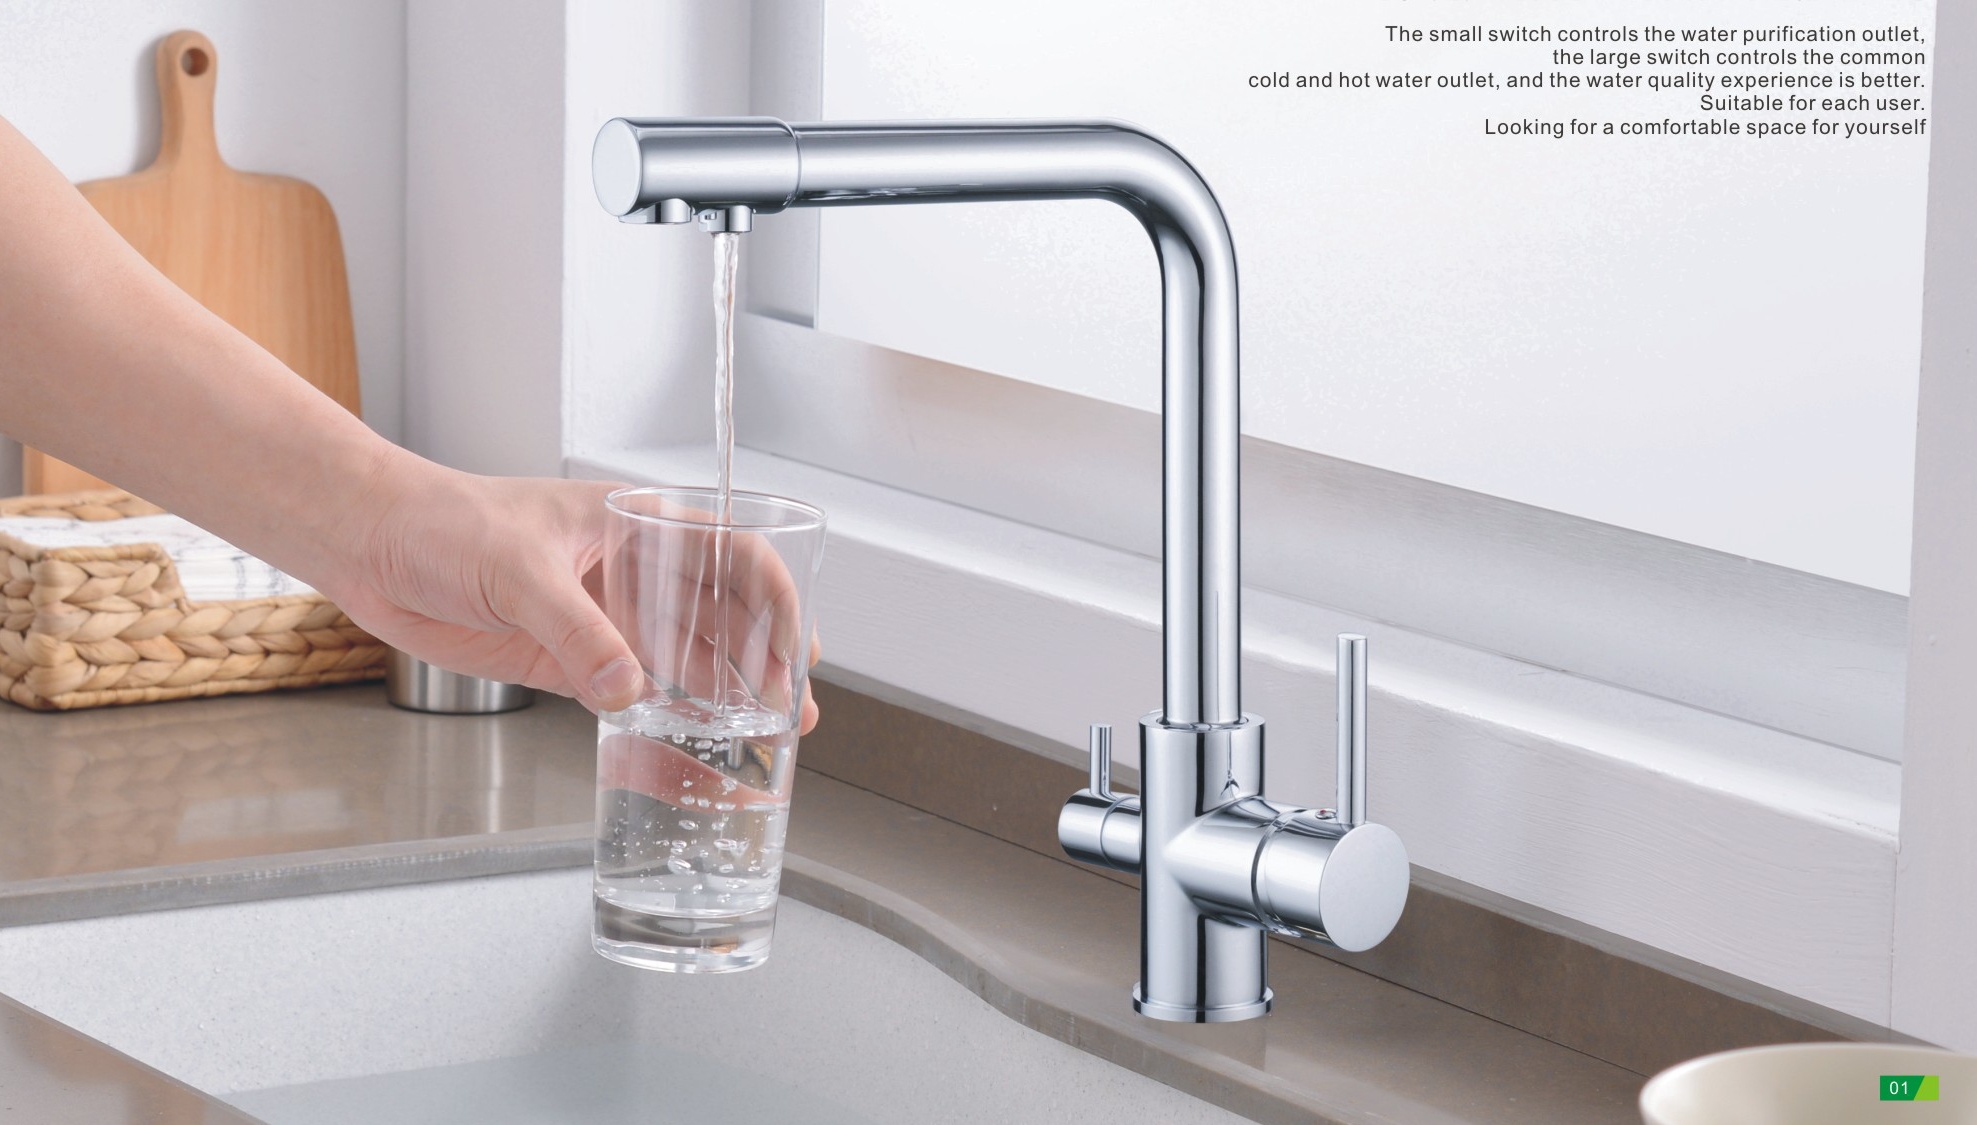 YL-604 High quality kitchen faucet for water purifier,drinking water tap water filter system sink faucet